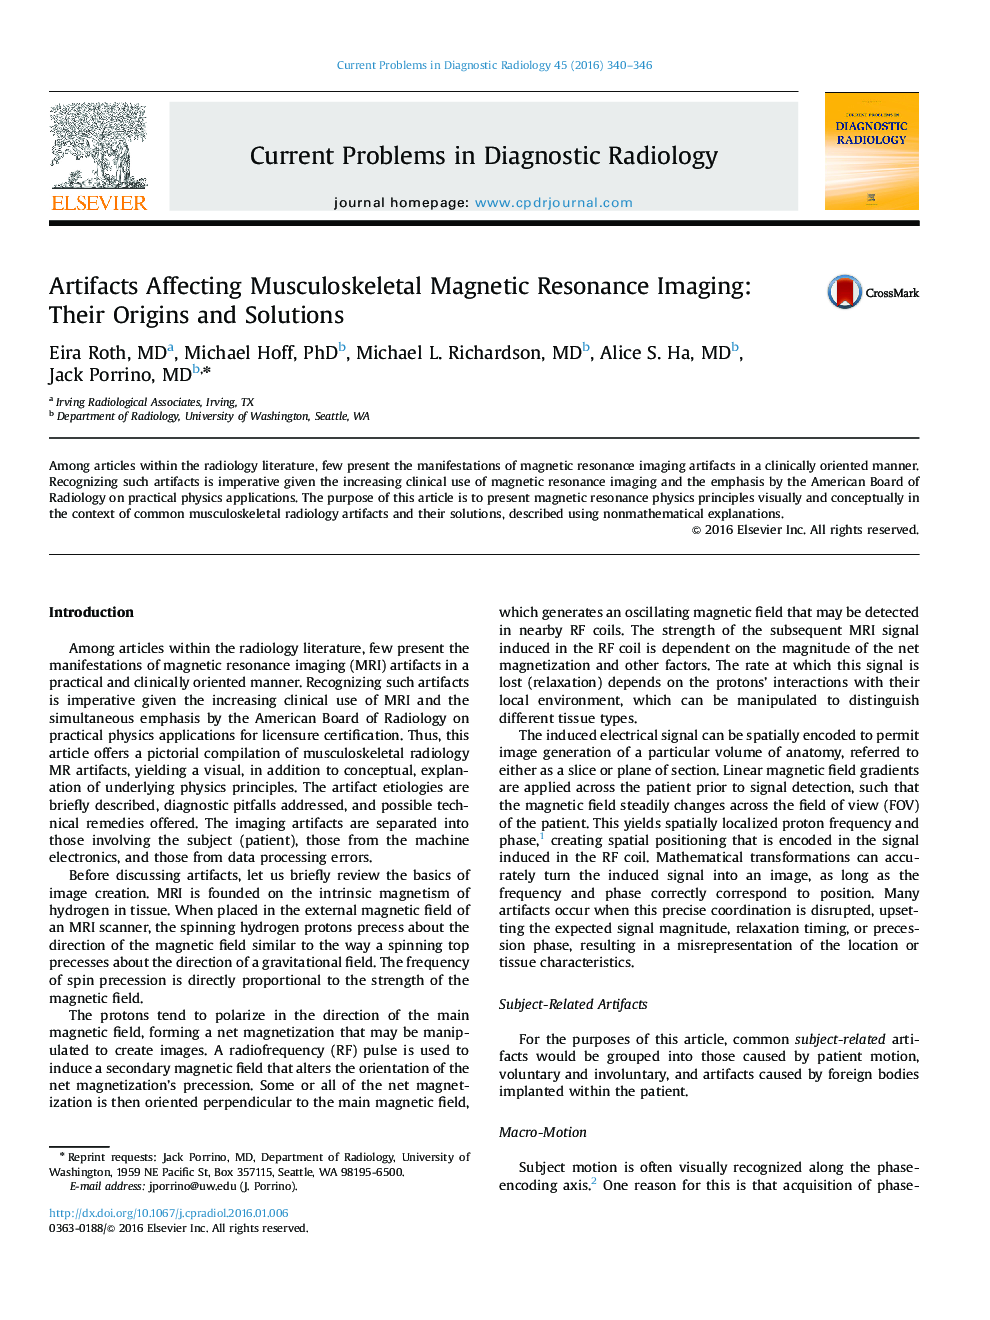 Artifacts Affecting Musculoskeletal Magnetic Resonance Imaging: Their Origins and Solutions